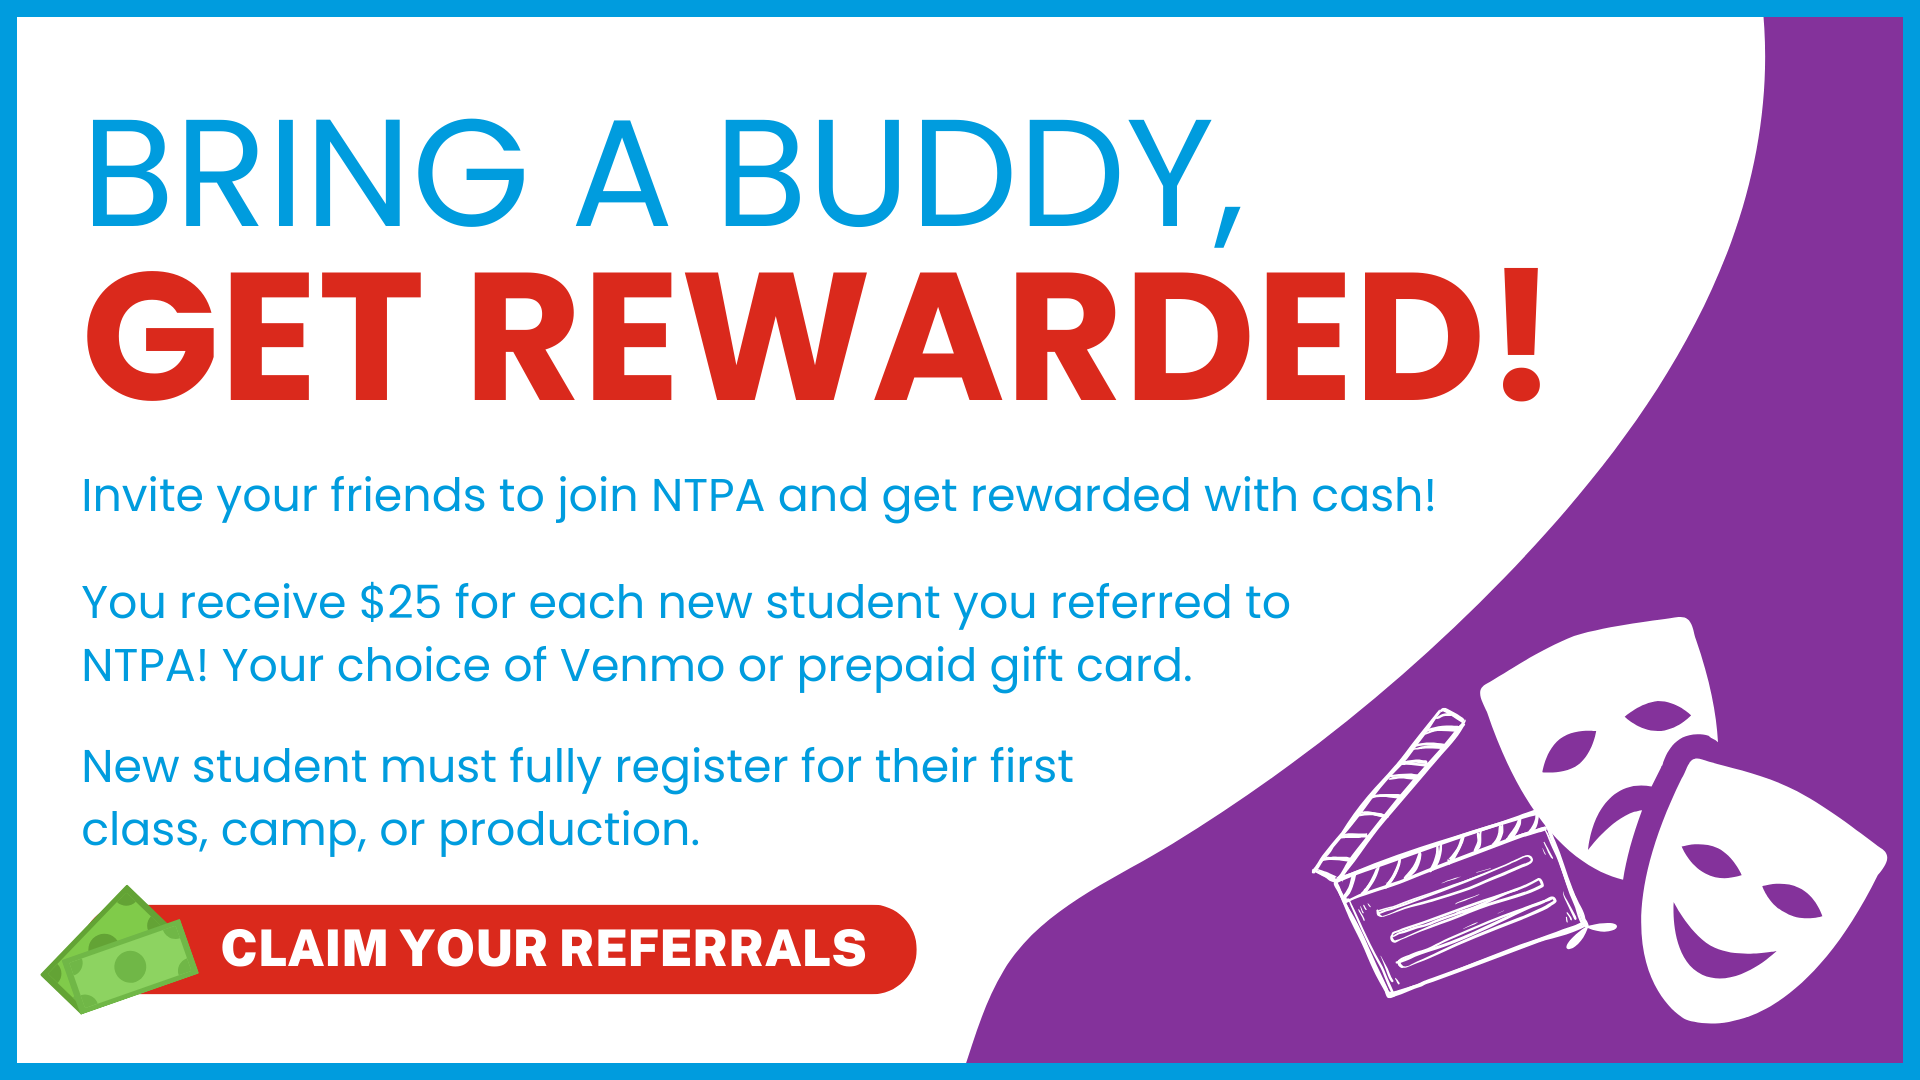 Bring a Buddy, Get Rewarded! Get $25 for each new student you refer to NTPA.